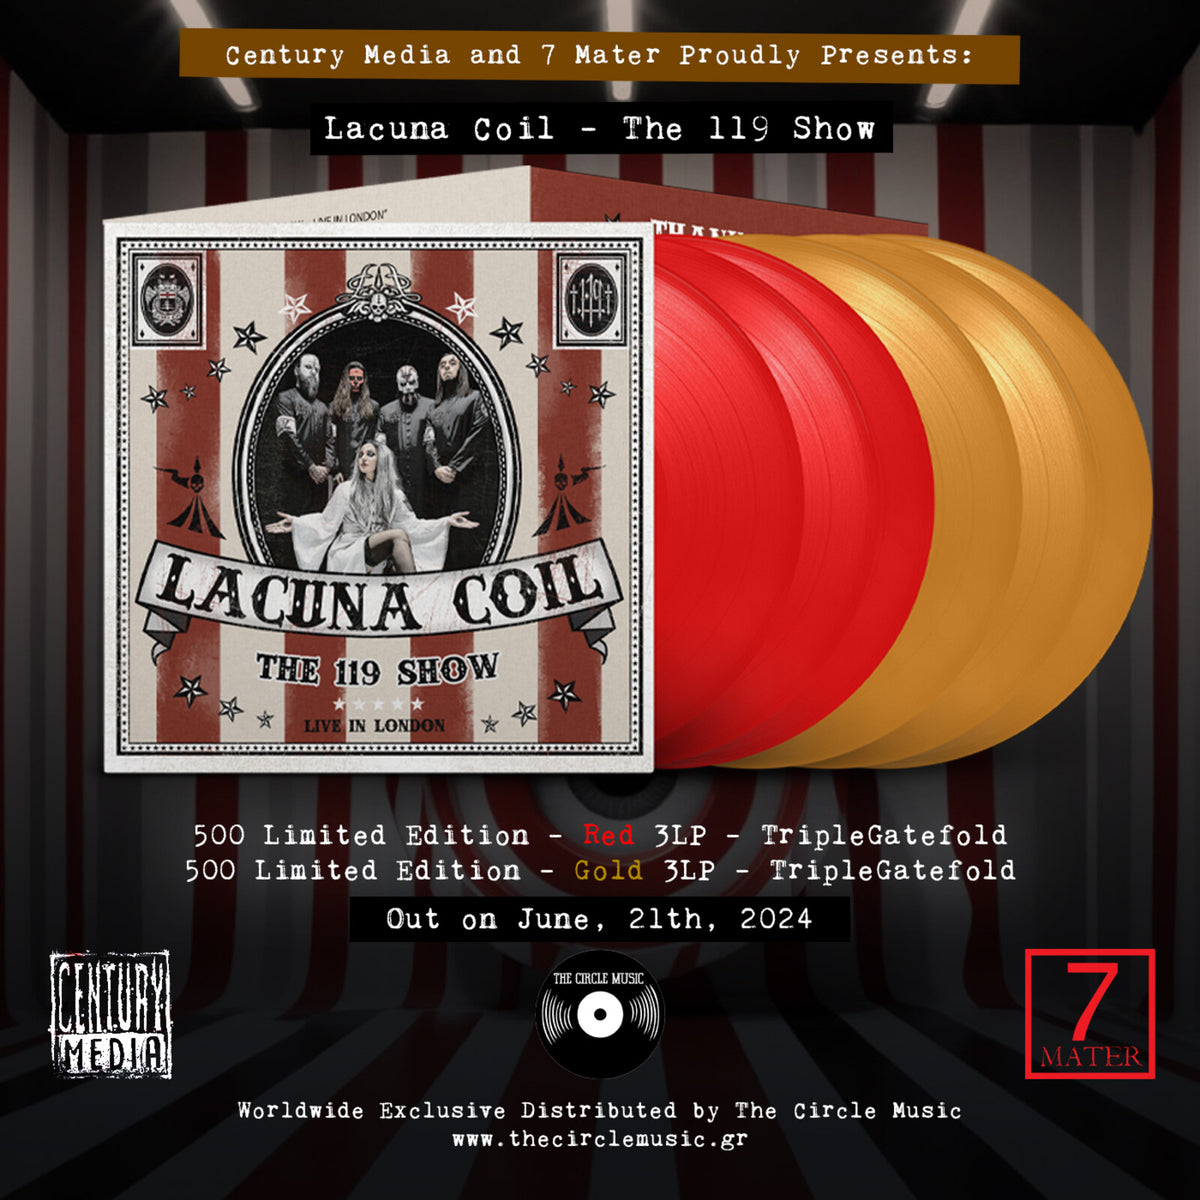 LACUNA COIL - THE 119 SHOW (LIVE IN LONDON) - SM46170422